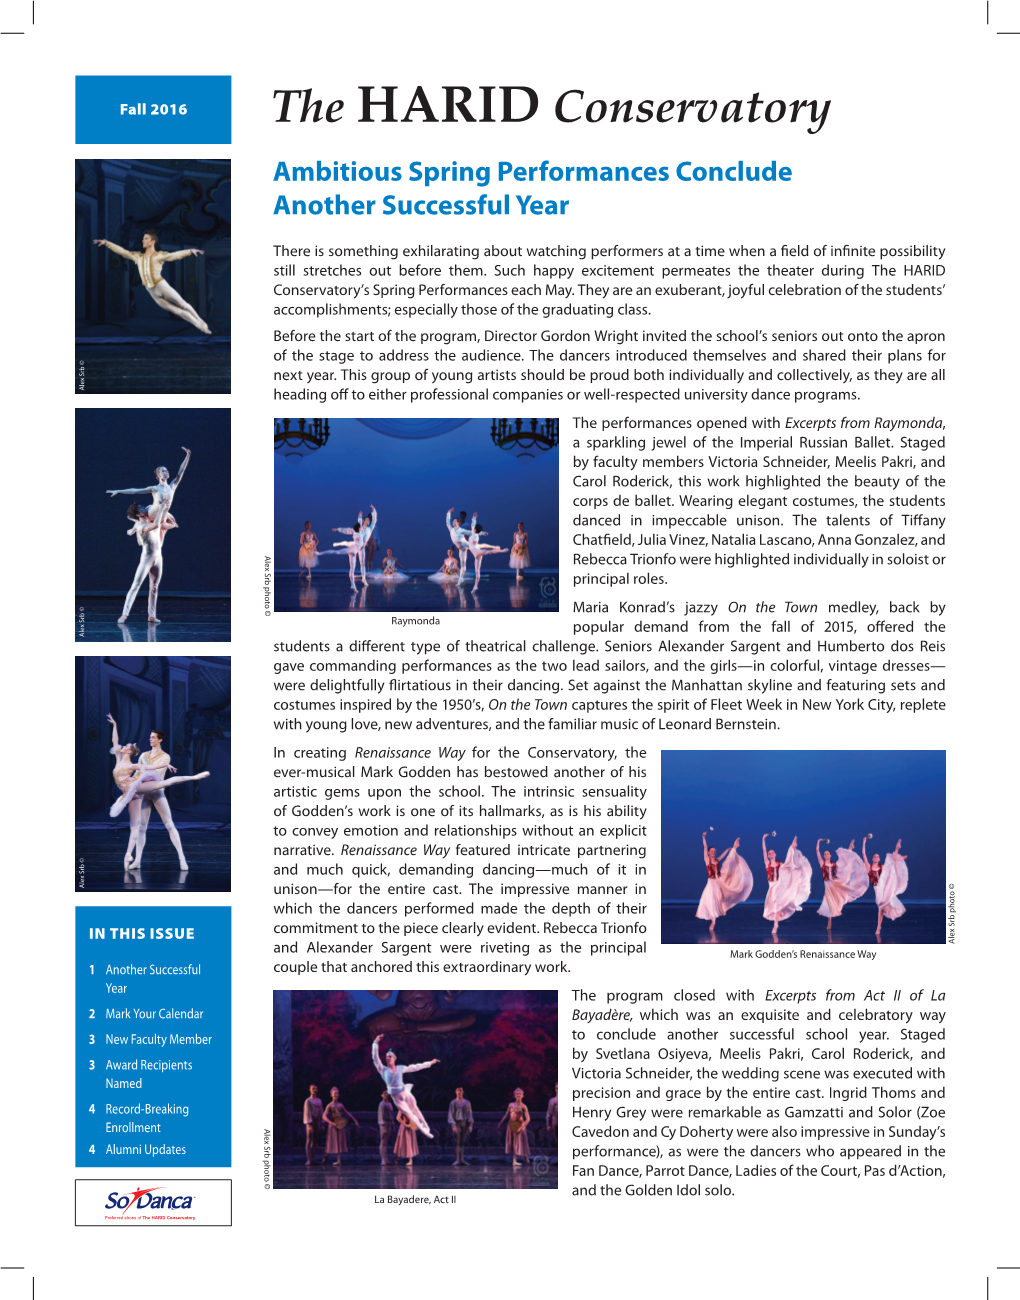 Ambitious Spring Performances Conclude Another Successful Year